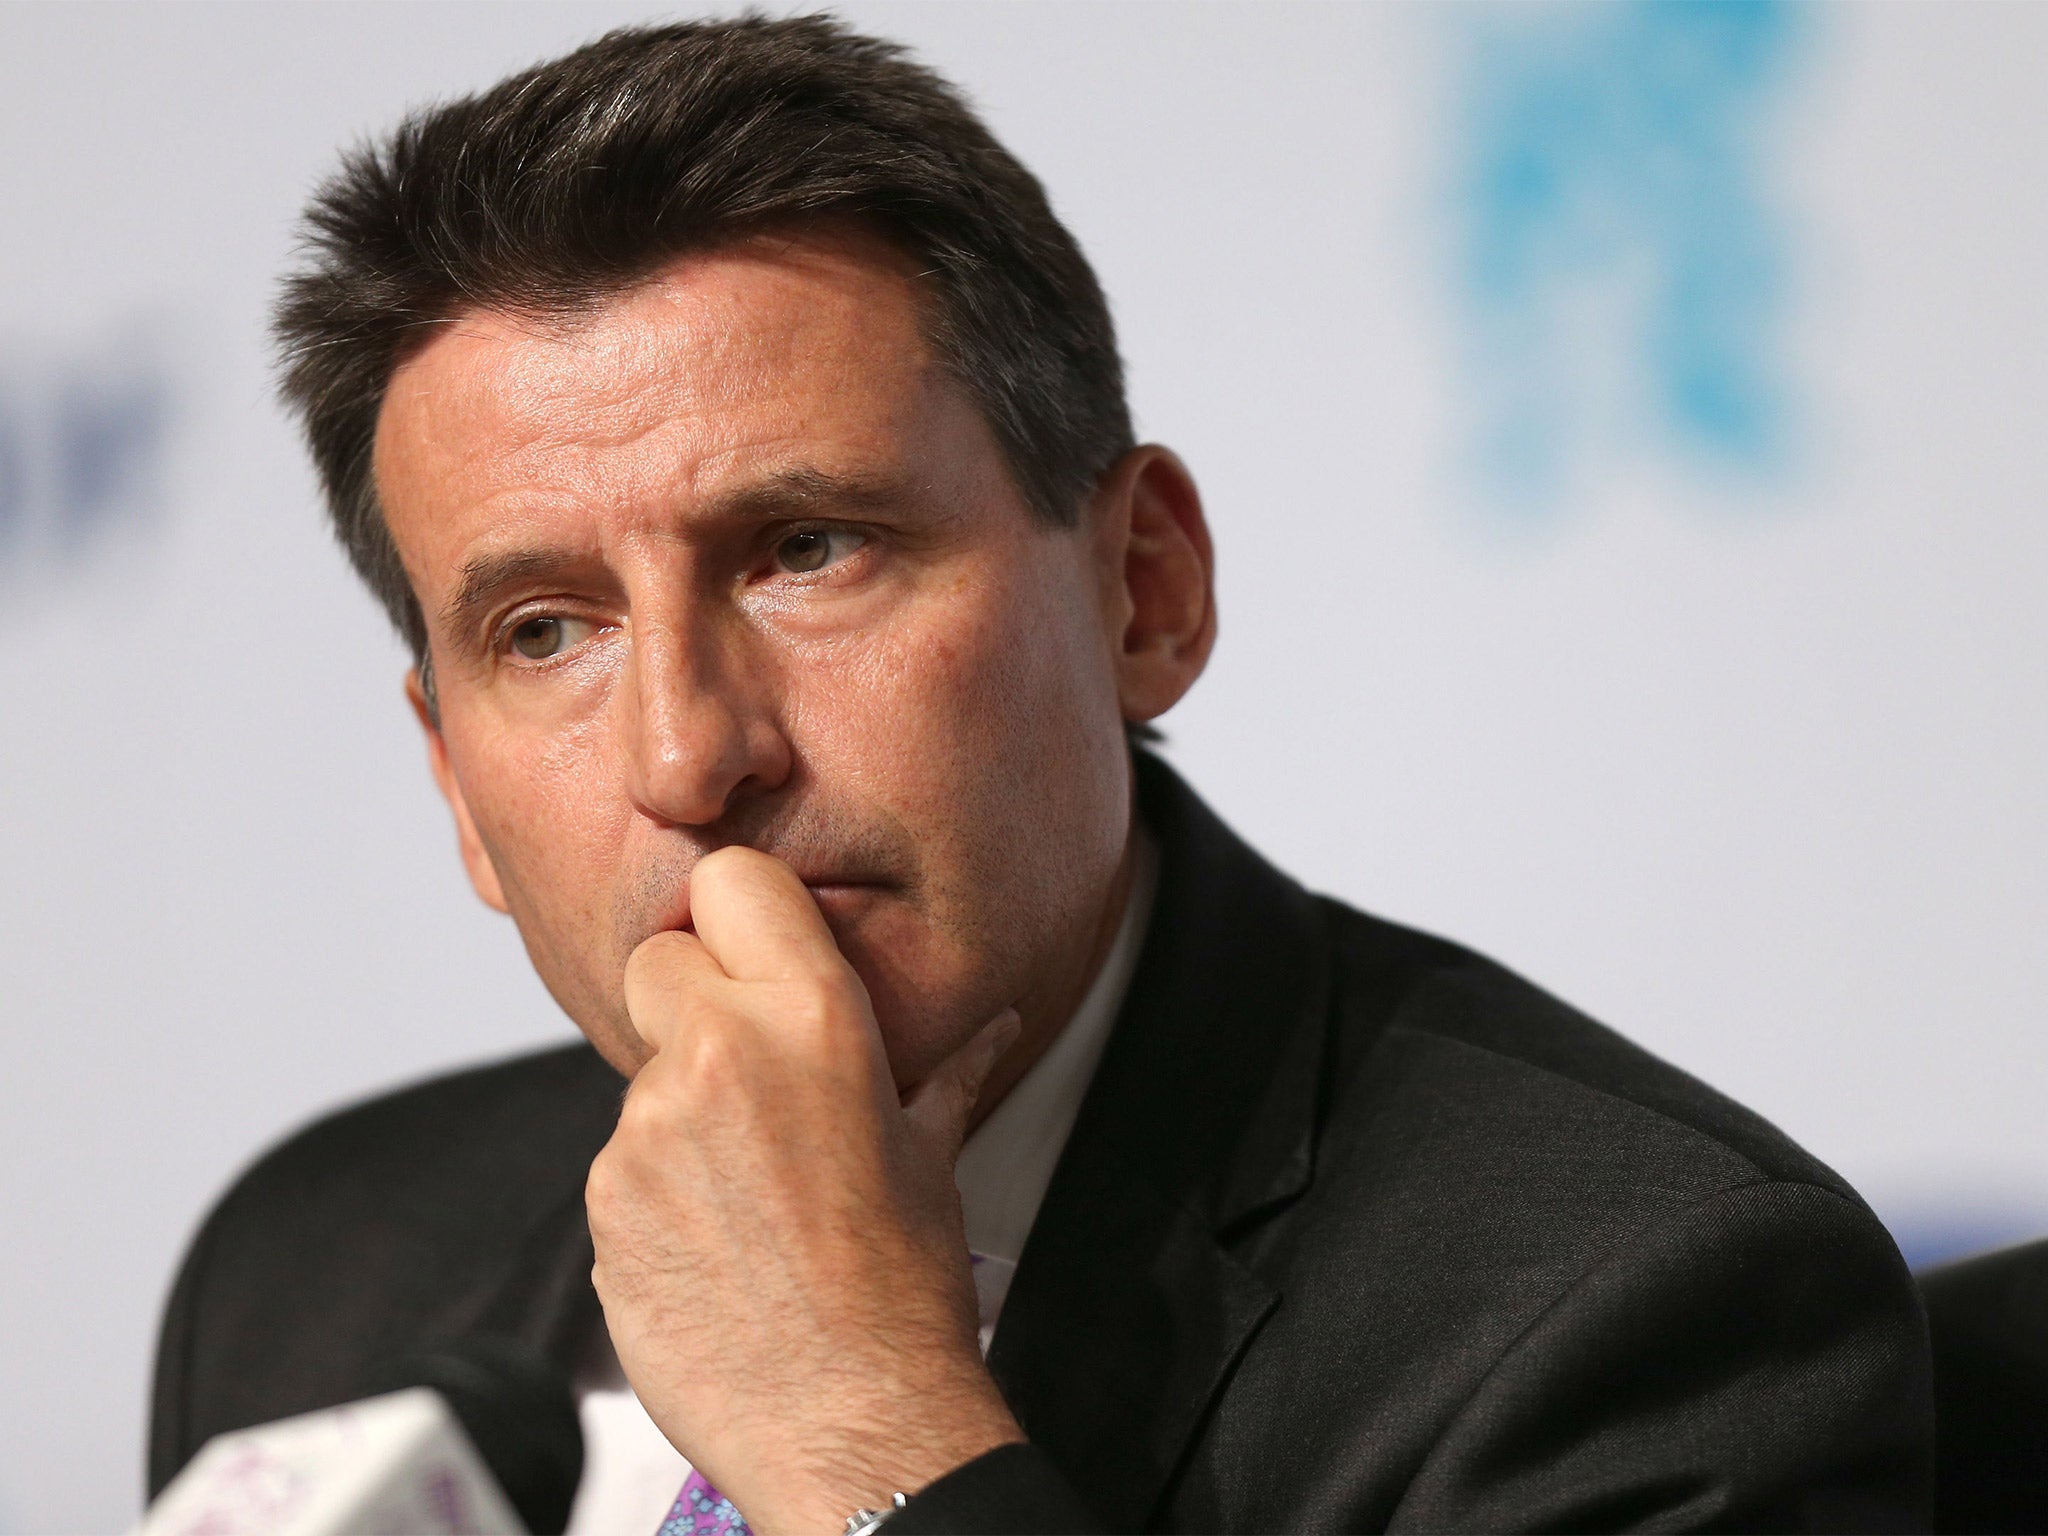 Sebastian Coe has pulled out of the race